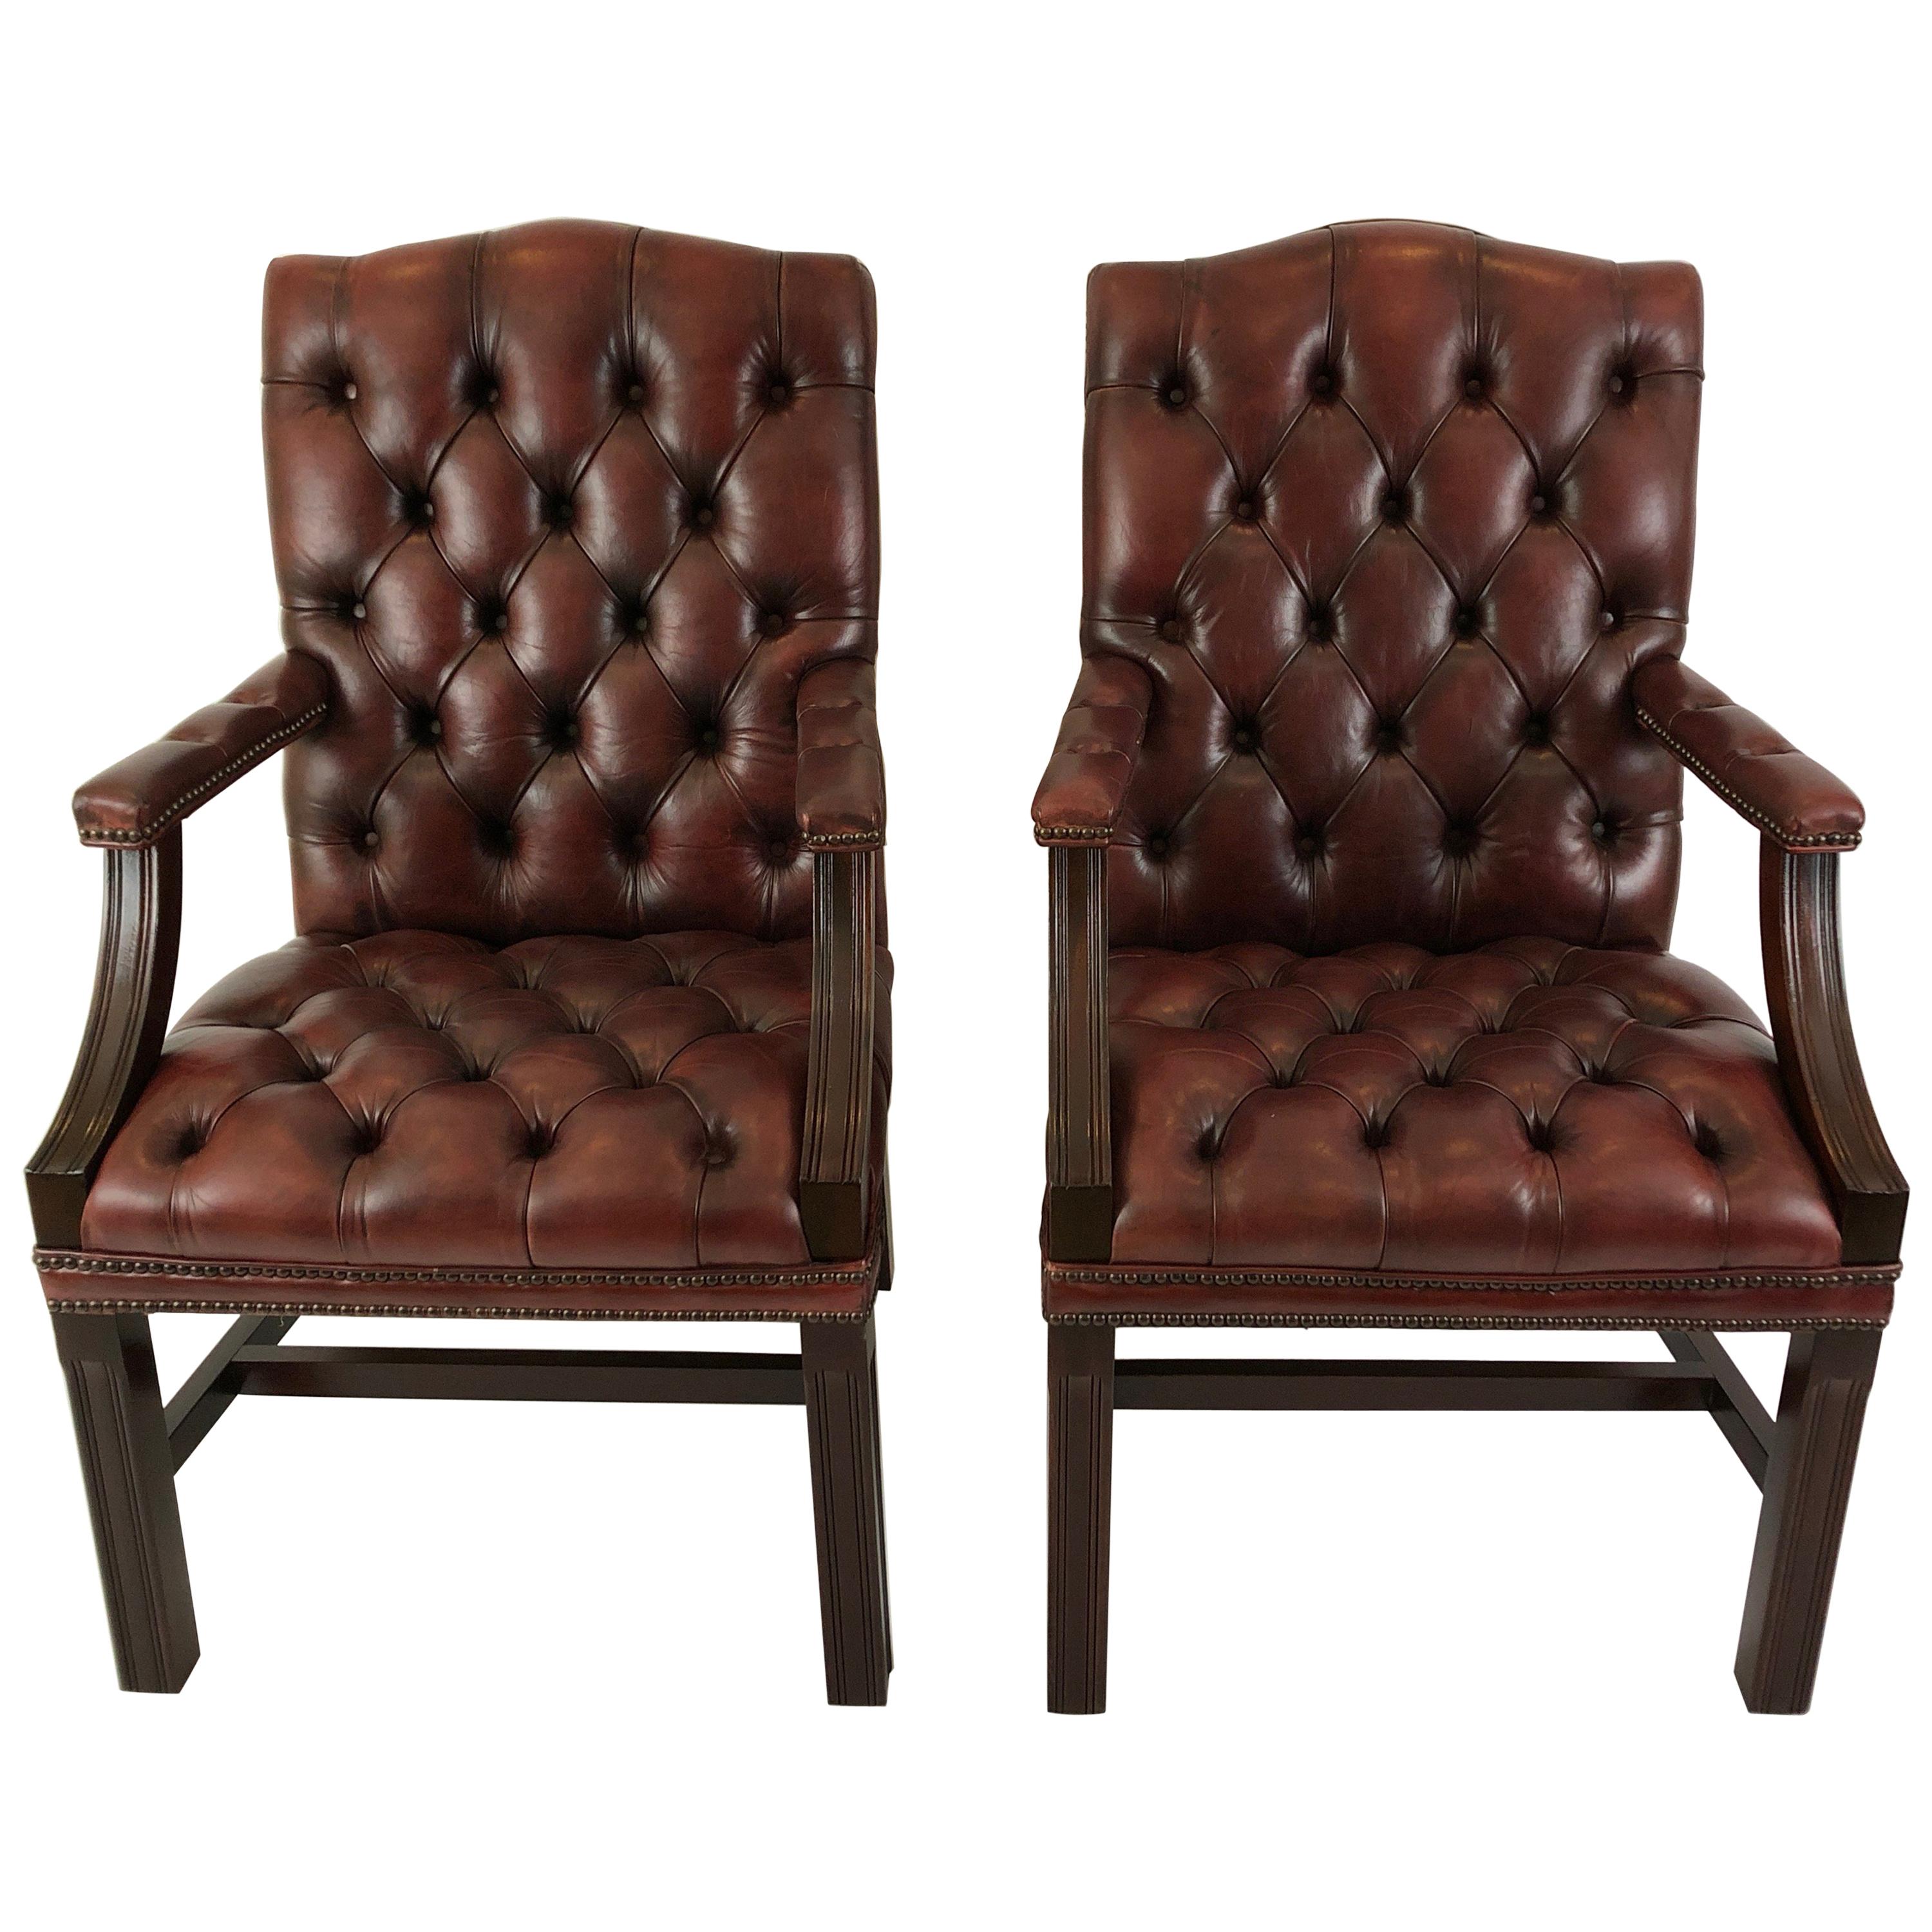 Libraryish Pair of Chesterfield Sumptuous Tufted Leather Armchairs